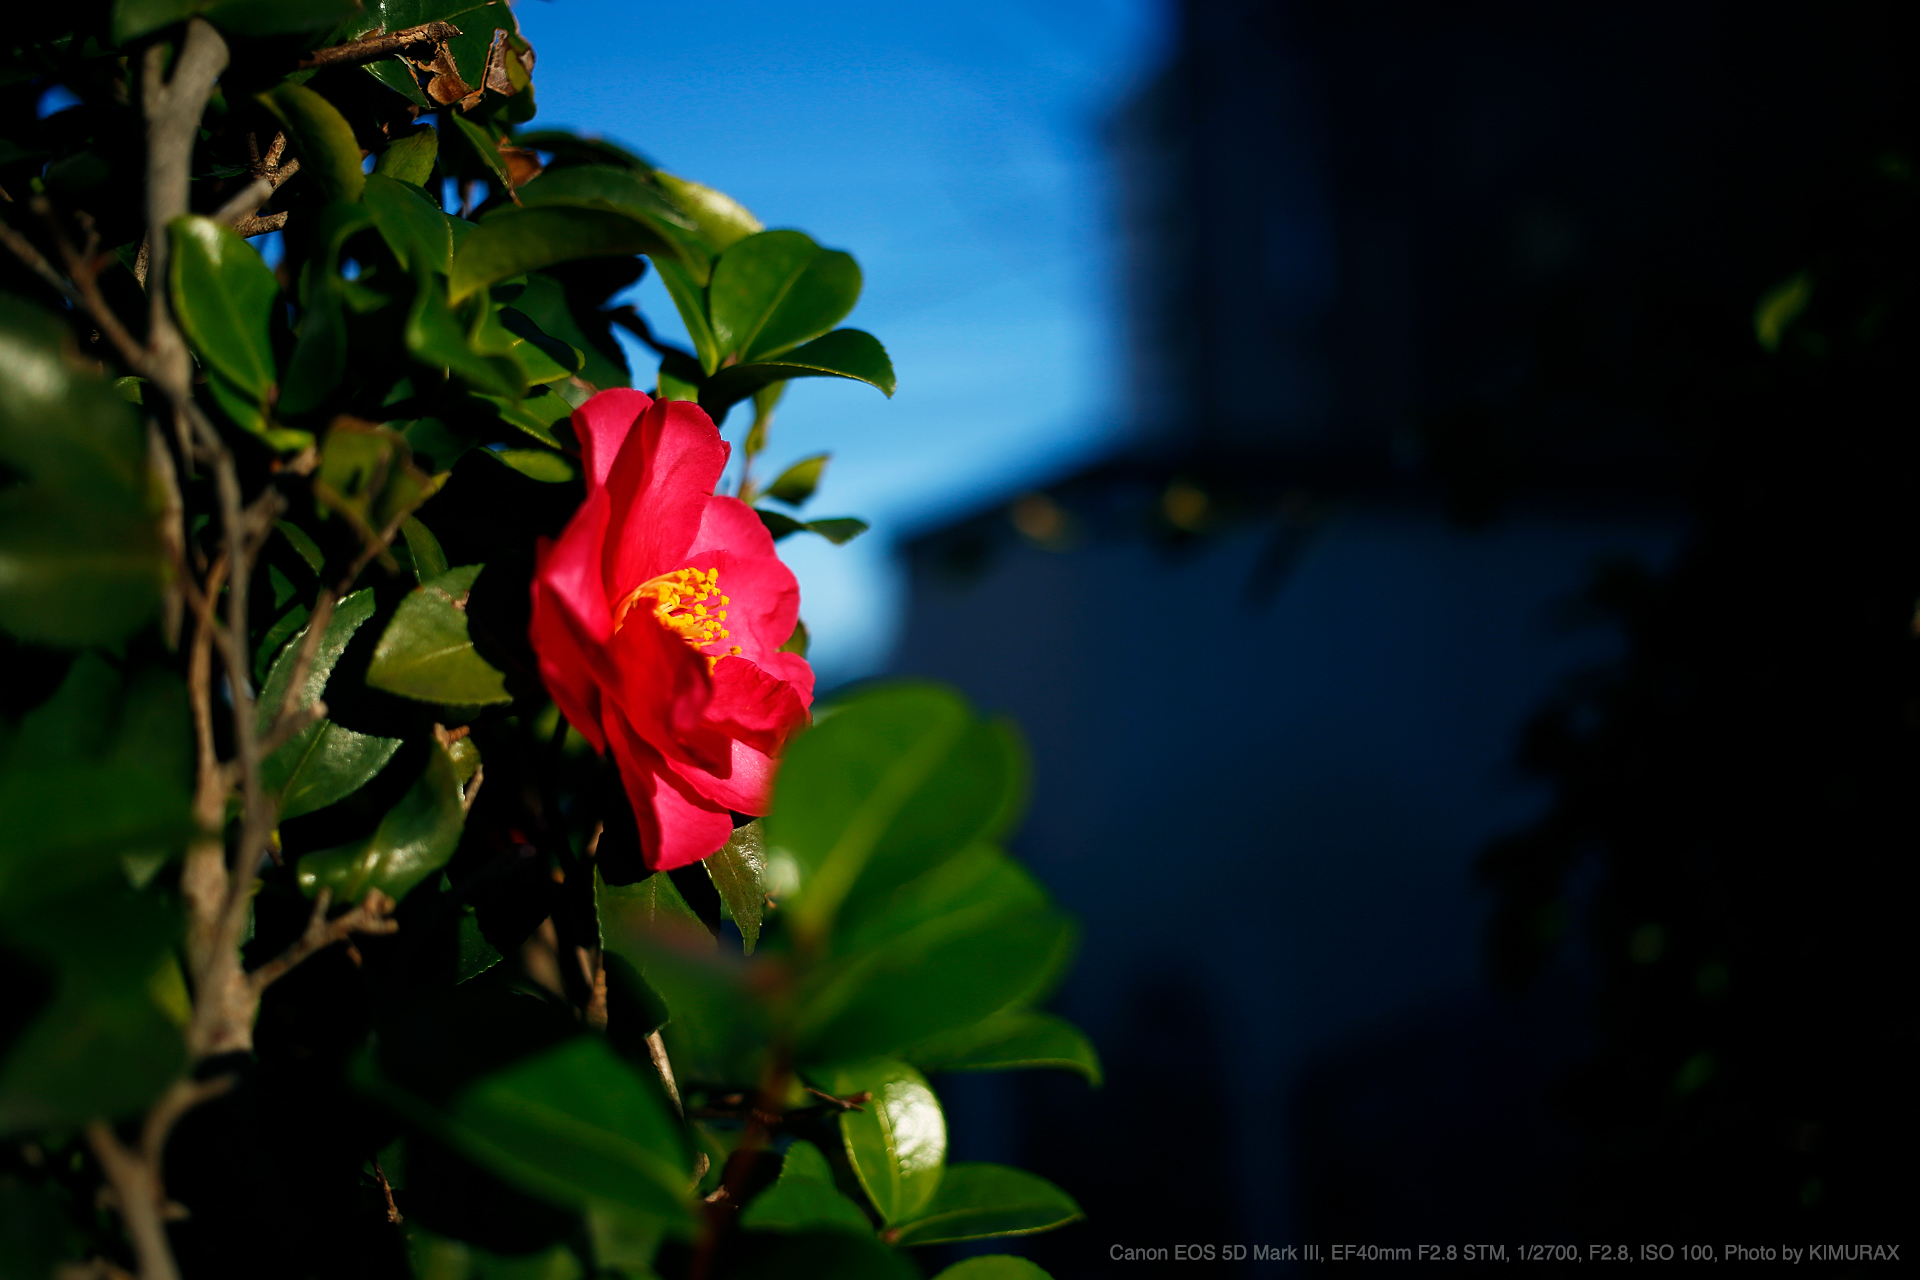 Canon EOS 5D Mark III, EF40mm F2.8 STM, Photo by KIMURAX